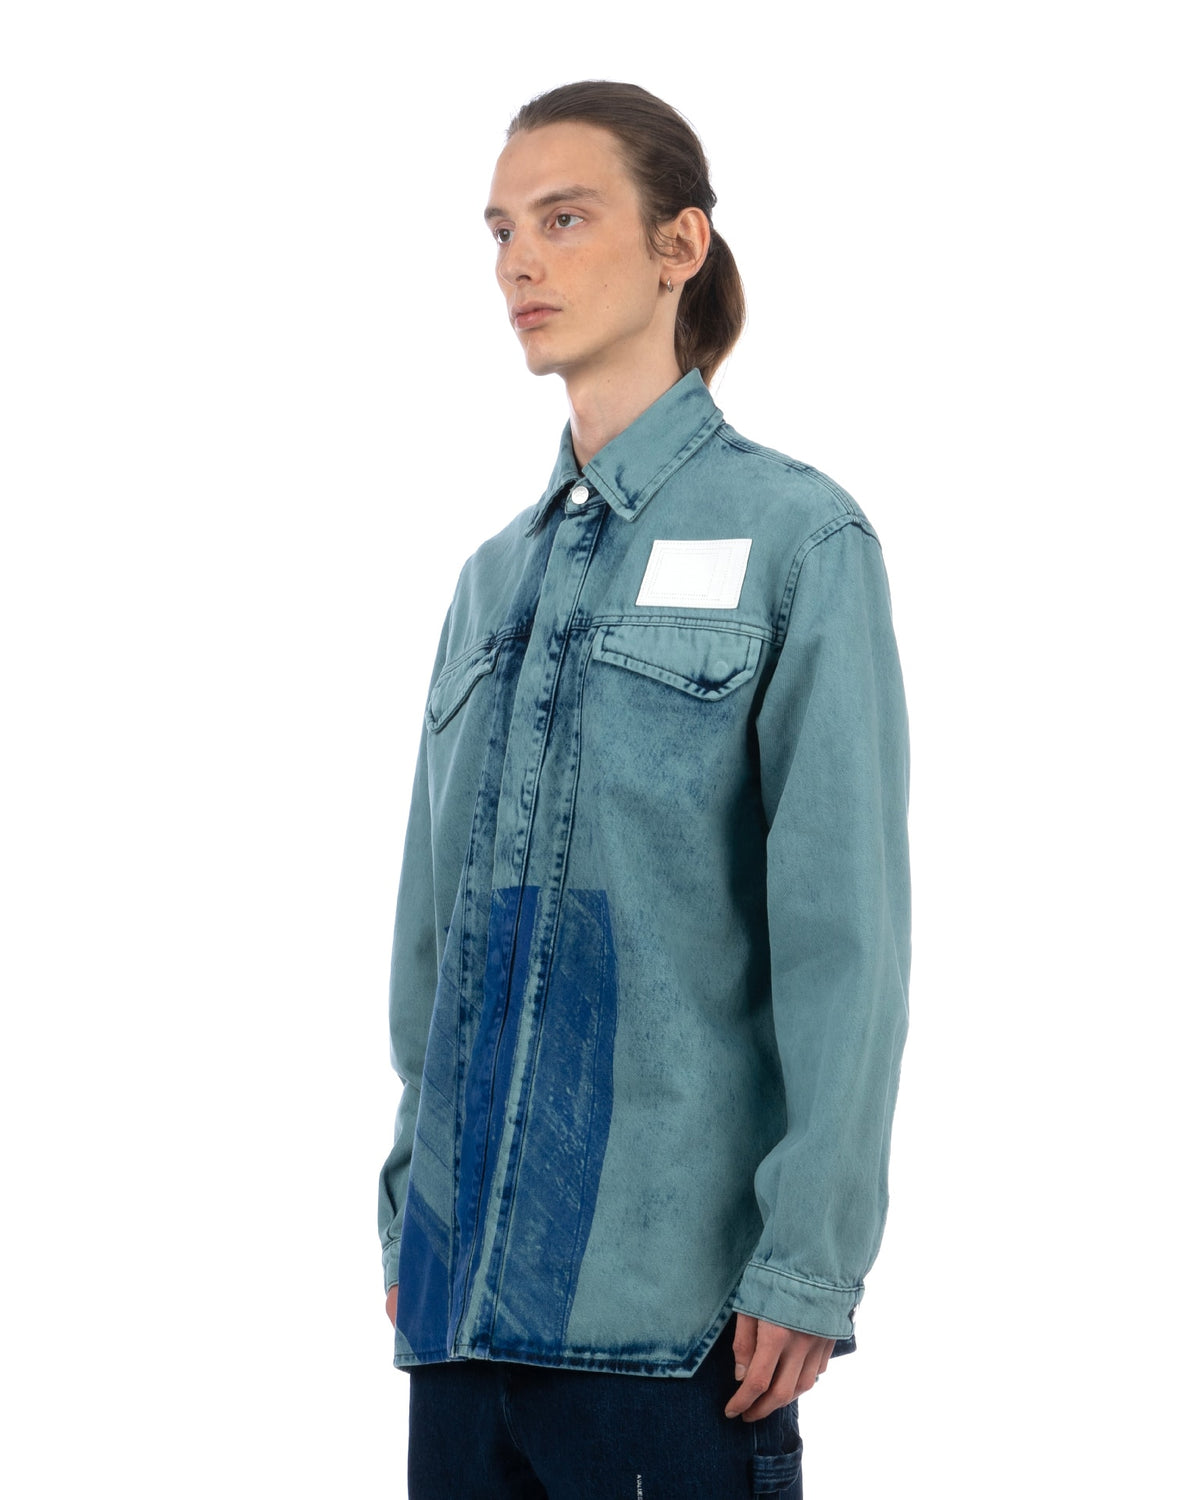 A-COLD-WALL* | Bleached Overdyed Shirt Faded Teal - Concrete